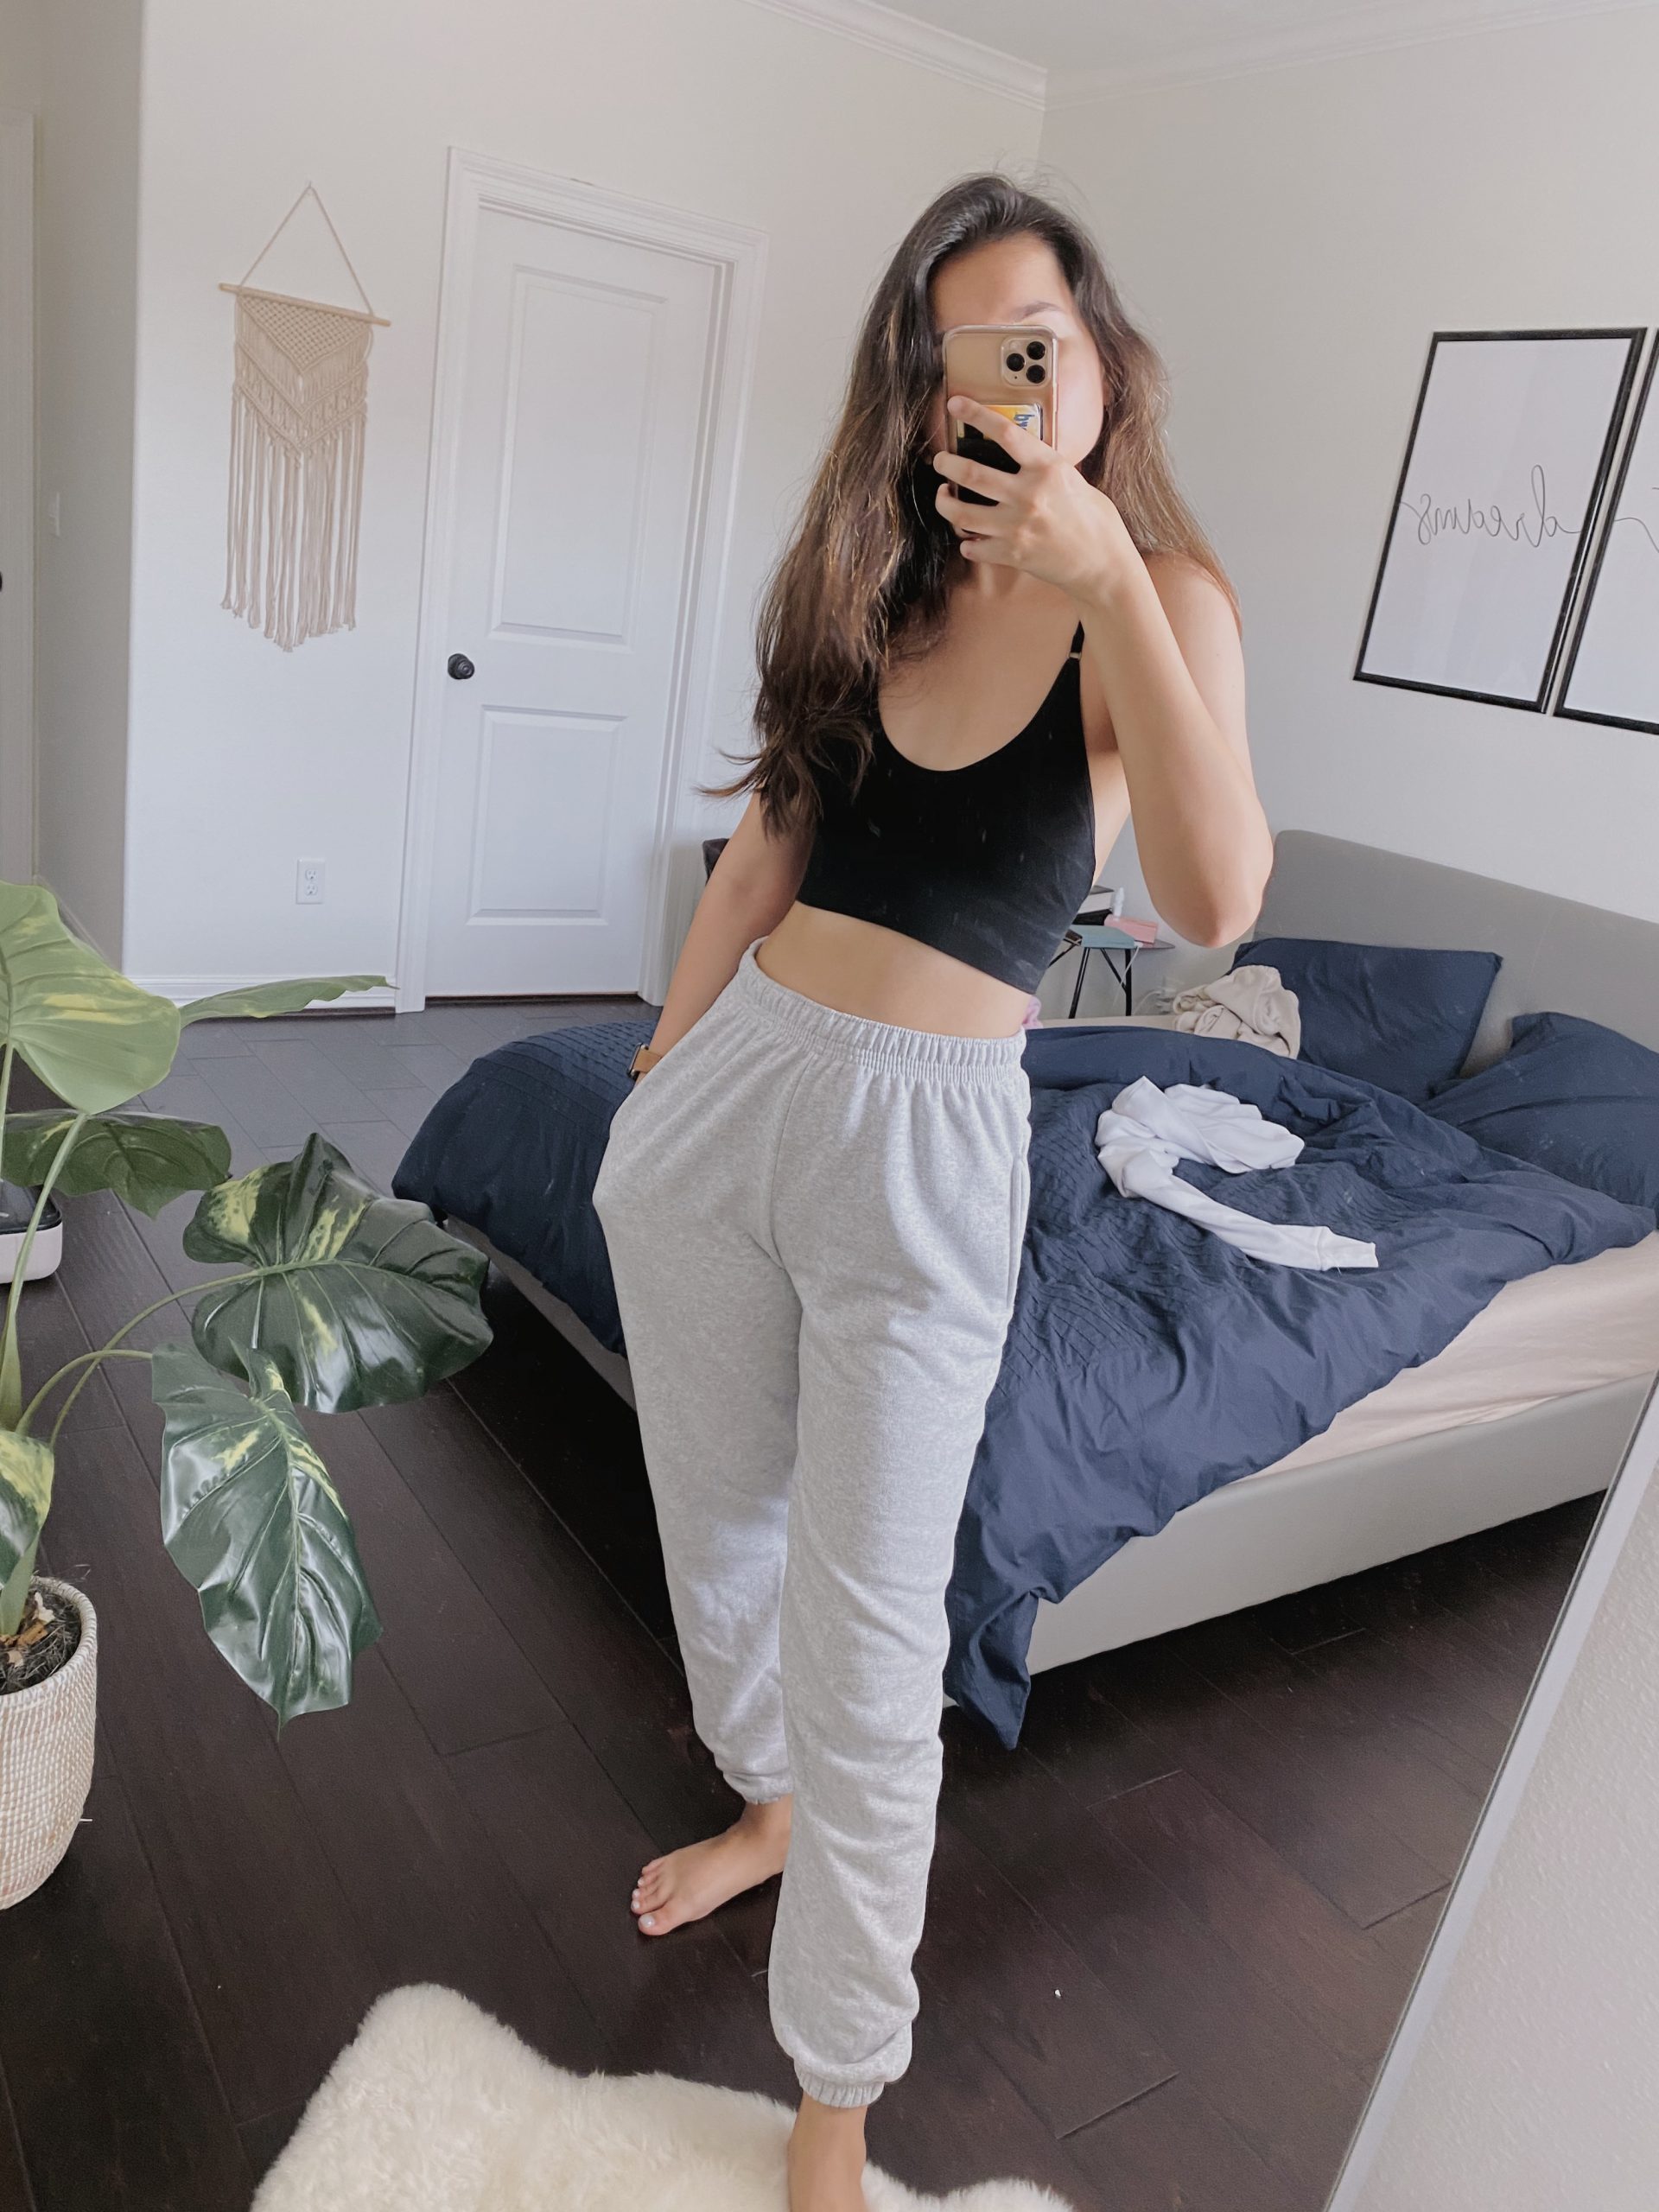 The $13 Sweatpants You've Been Seeing All Over Instagram - Sincerely Shifa